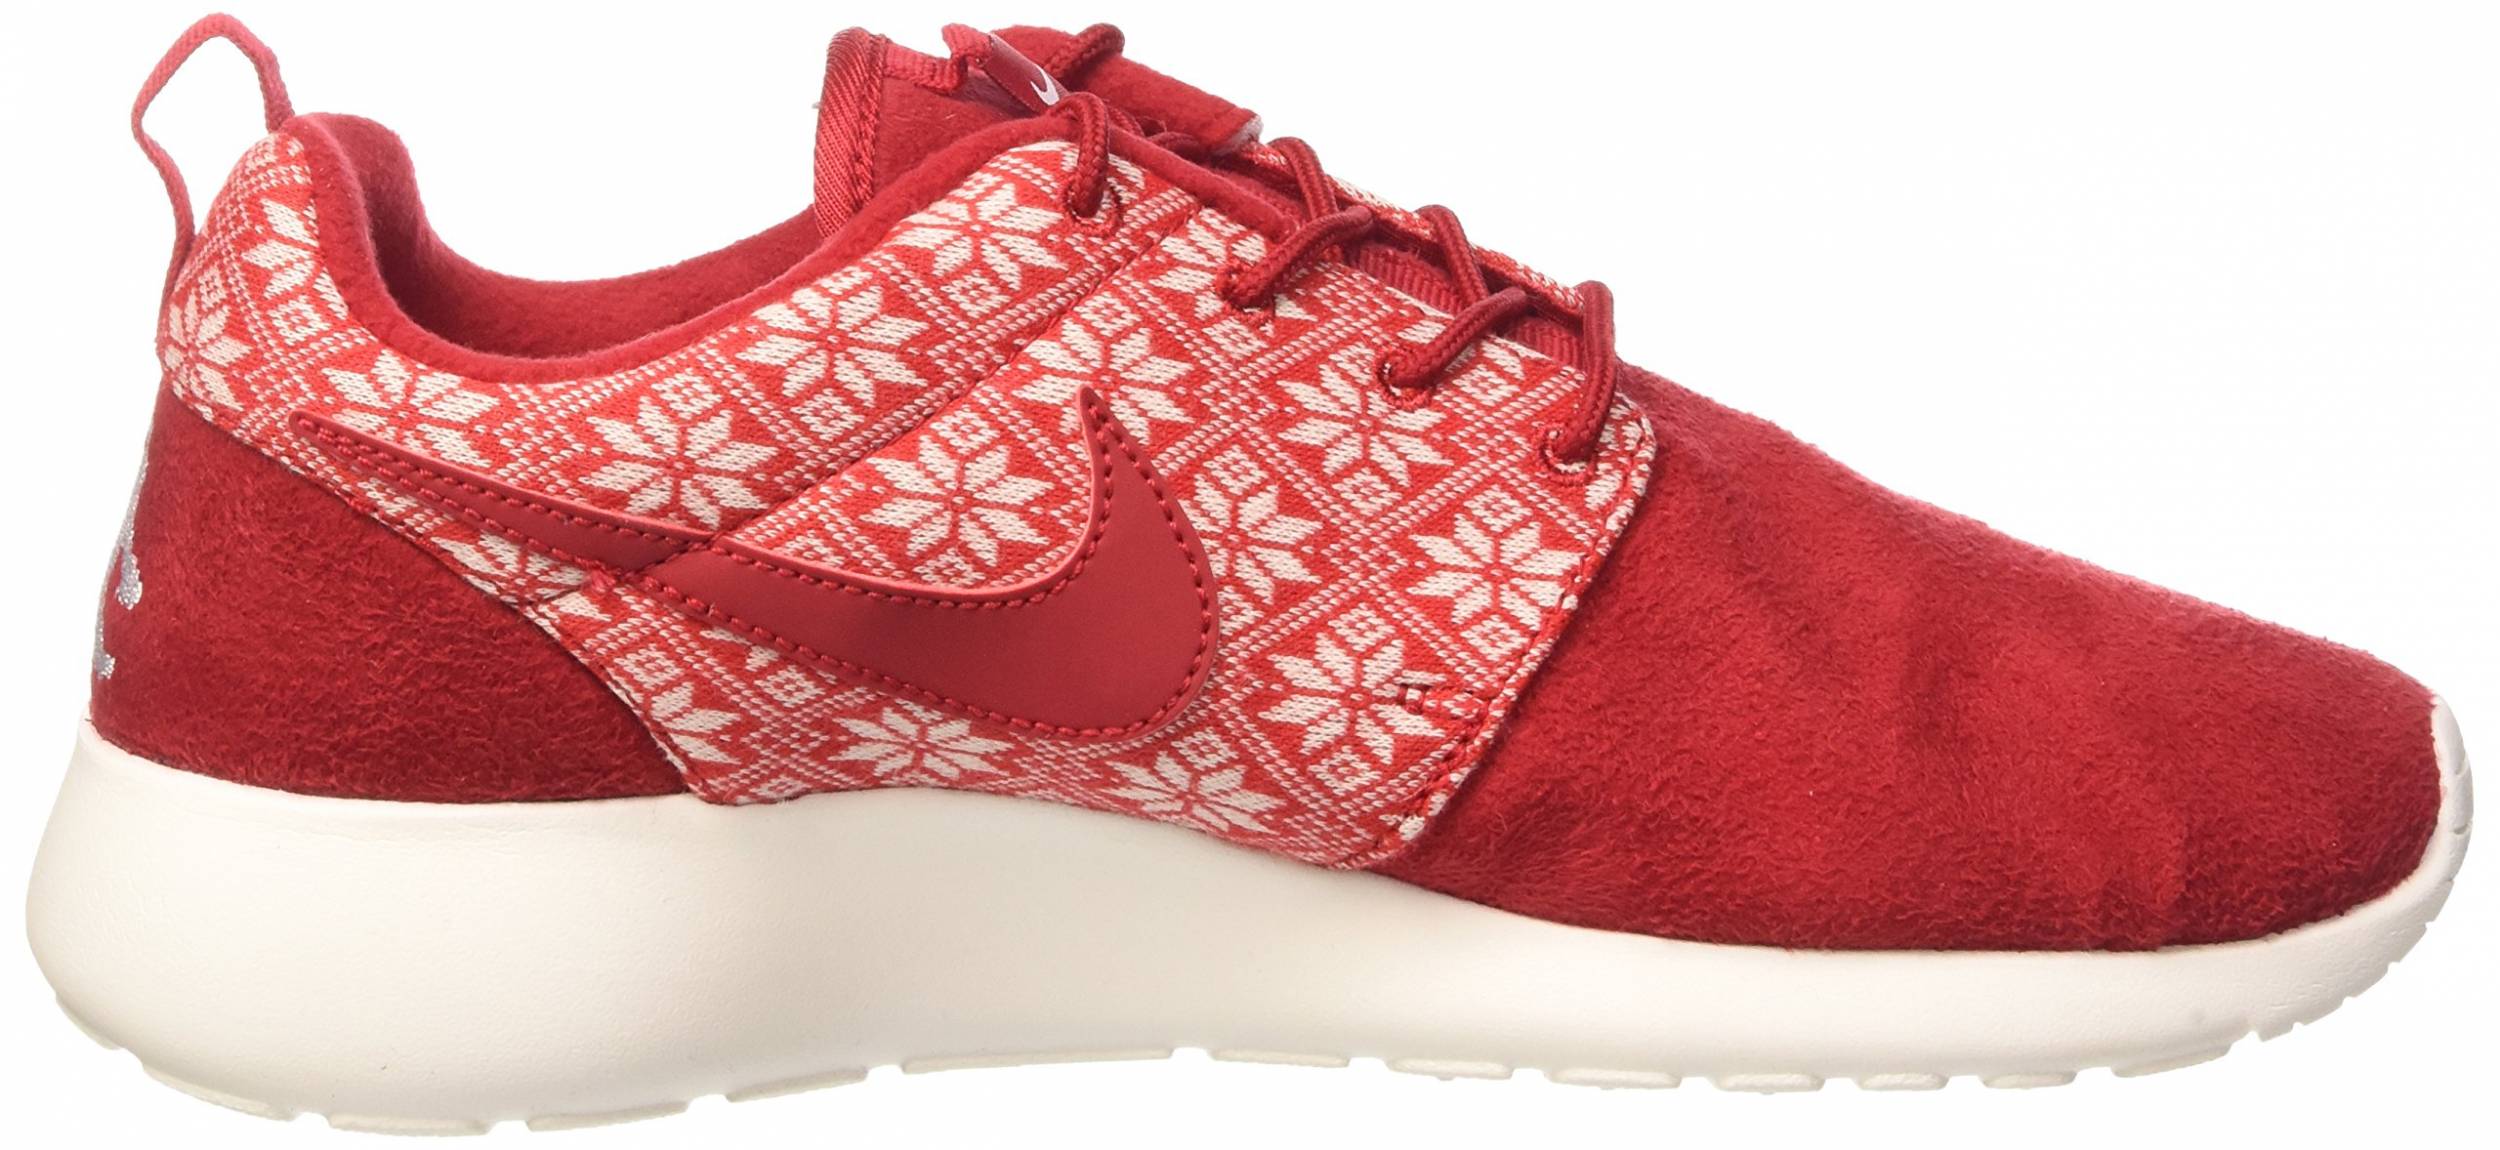 Only £45 + Review of Nike Roshe One Winter | RunRepeat